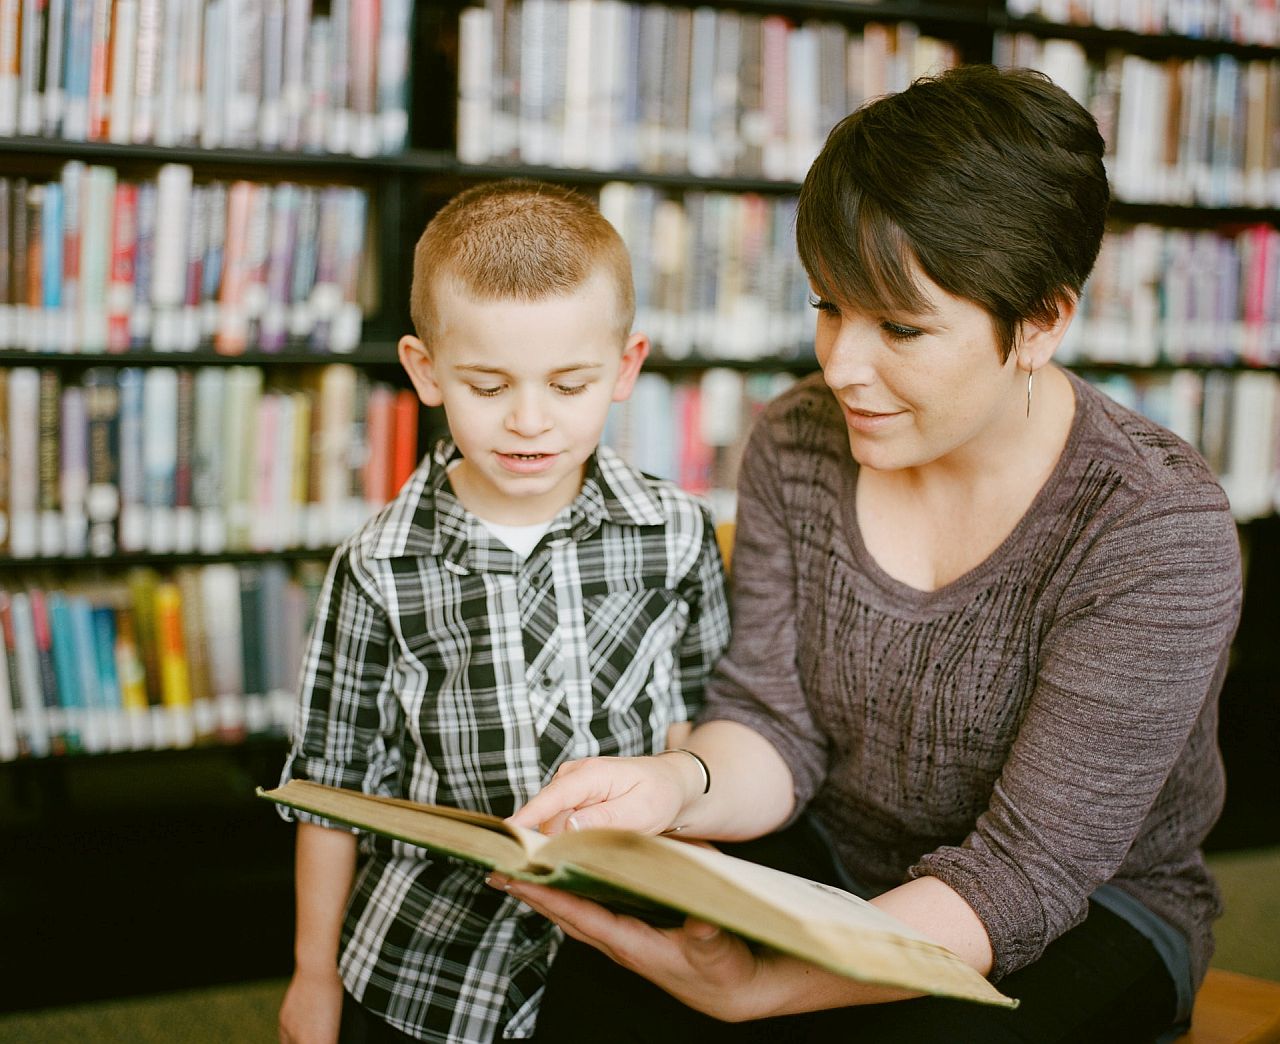 Paraeducator works with young student in library; paraeducators and teachers concept